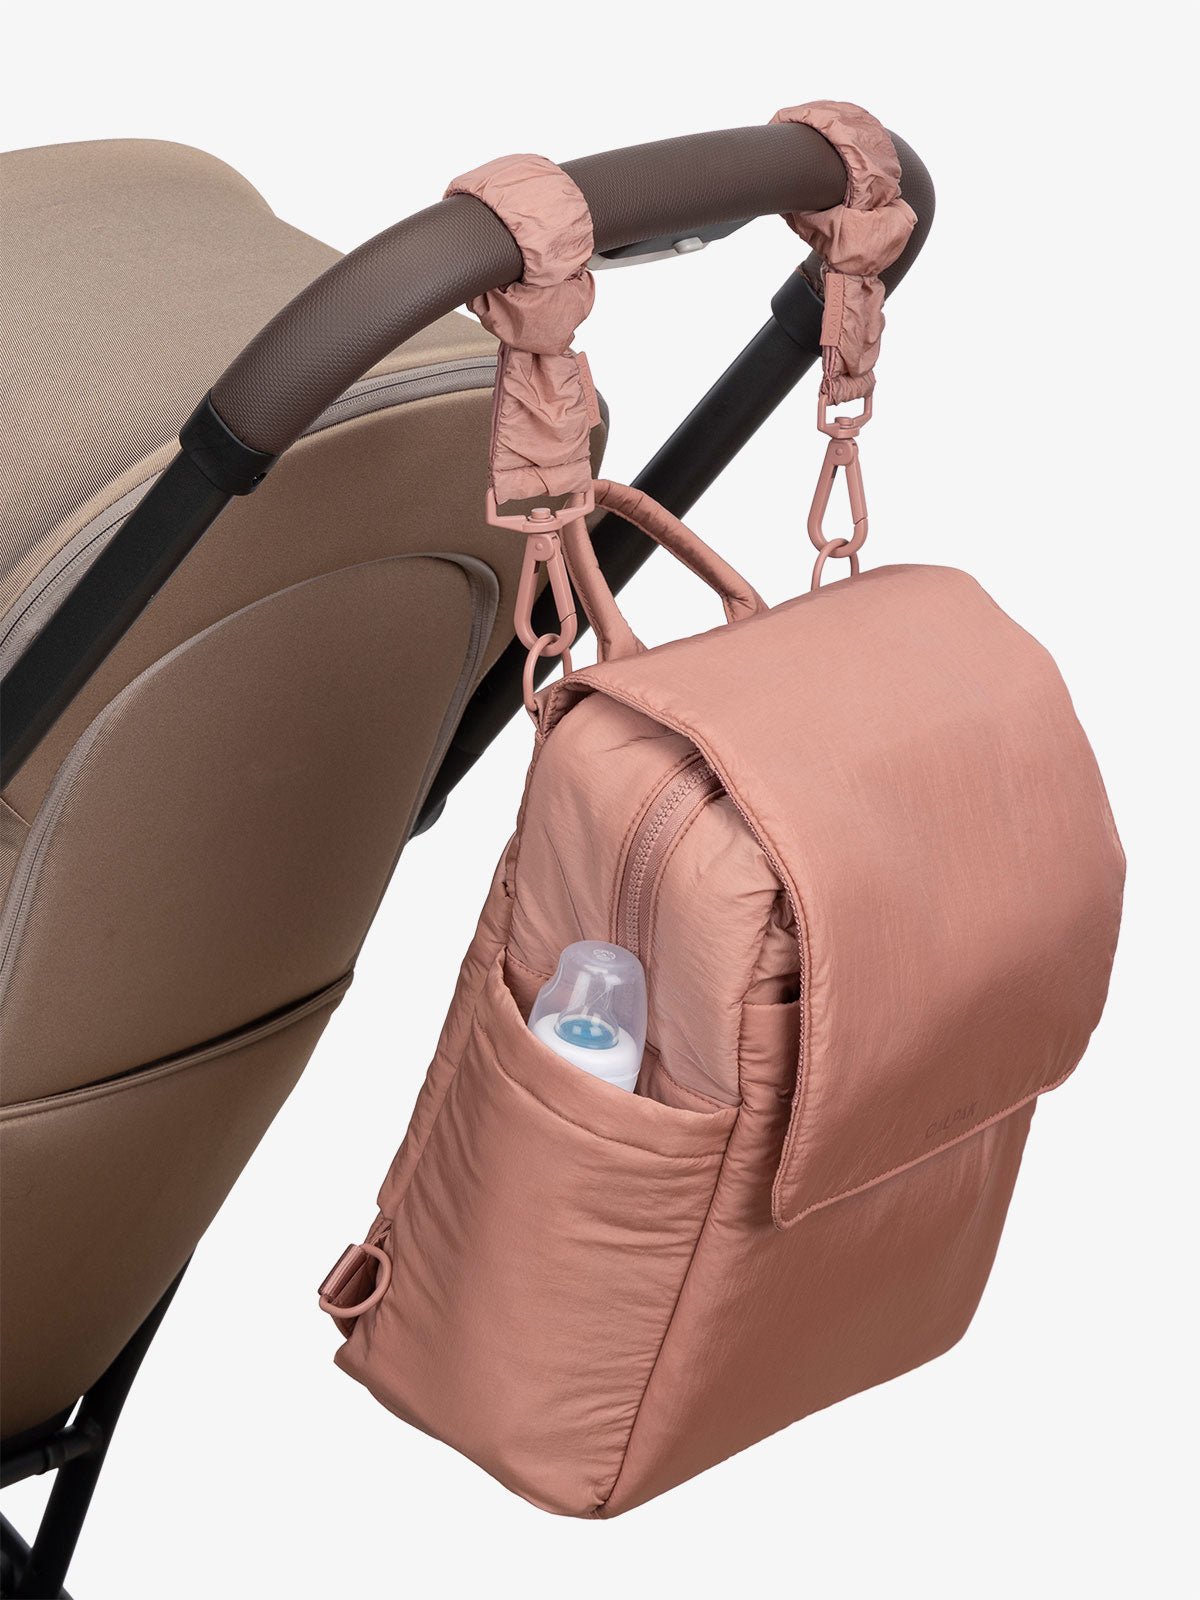 CALPAK Convertible Mini Diaper Backpack attached to stroller by CALPAK Stroller Straps in pink peony